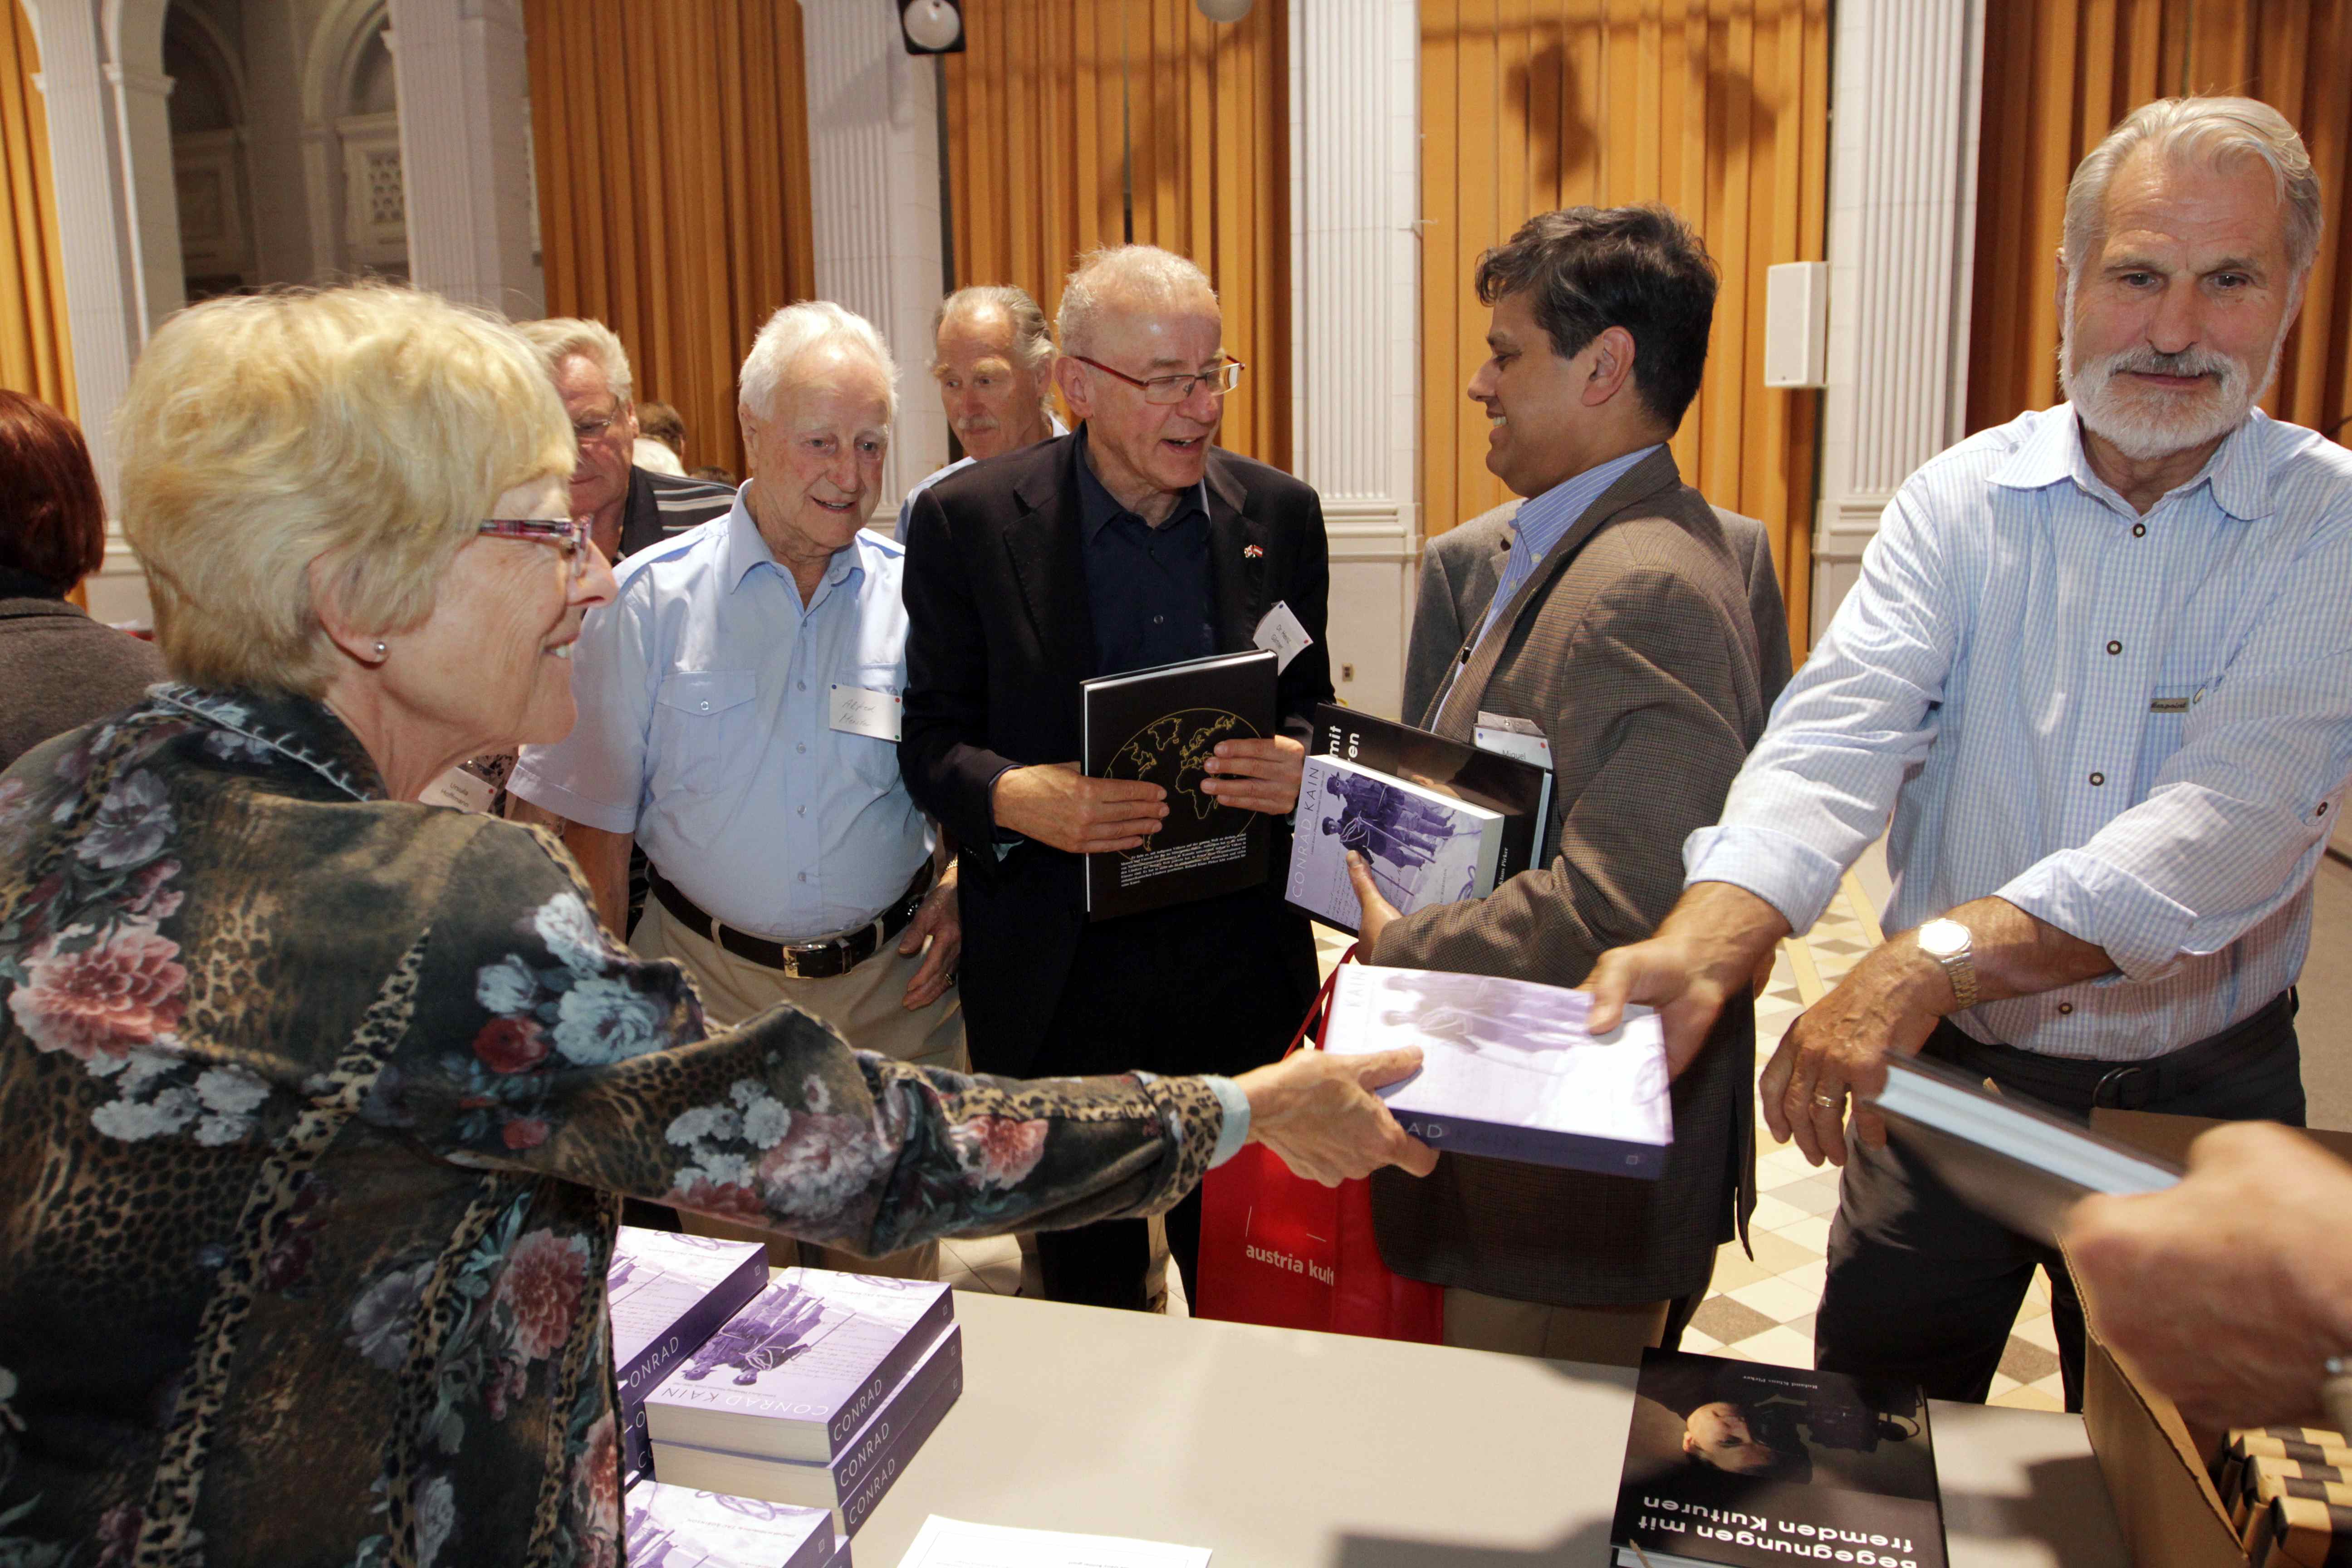 Christine Welling distributes copies of books by Conrad Kain and Roland Pirker